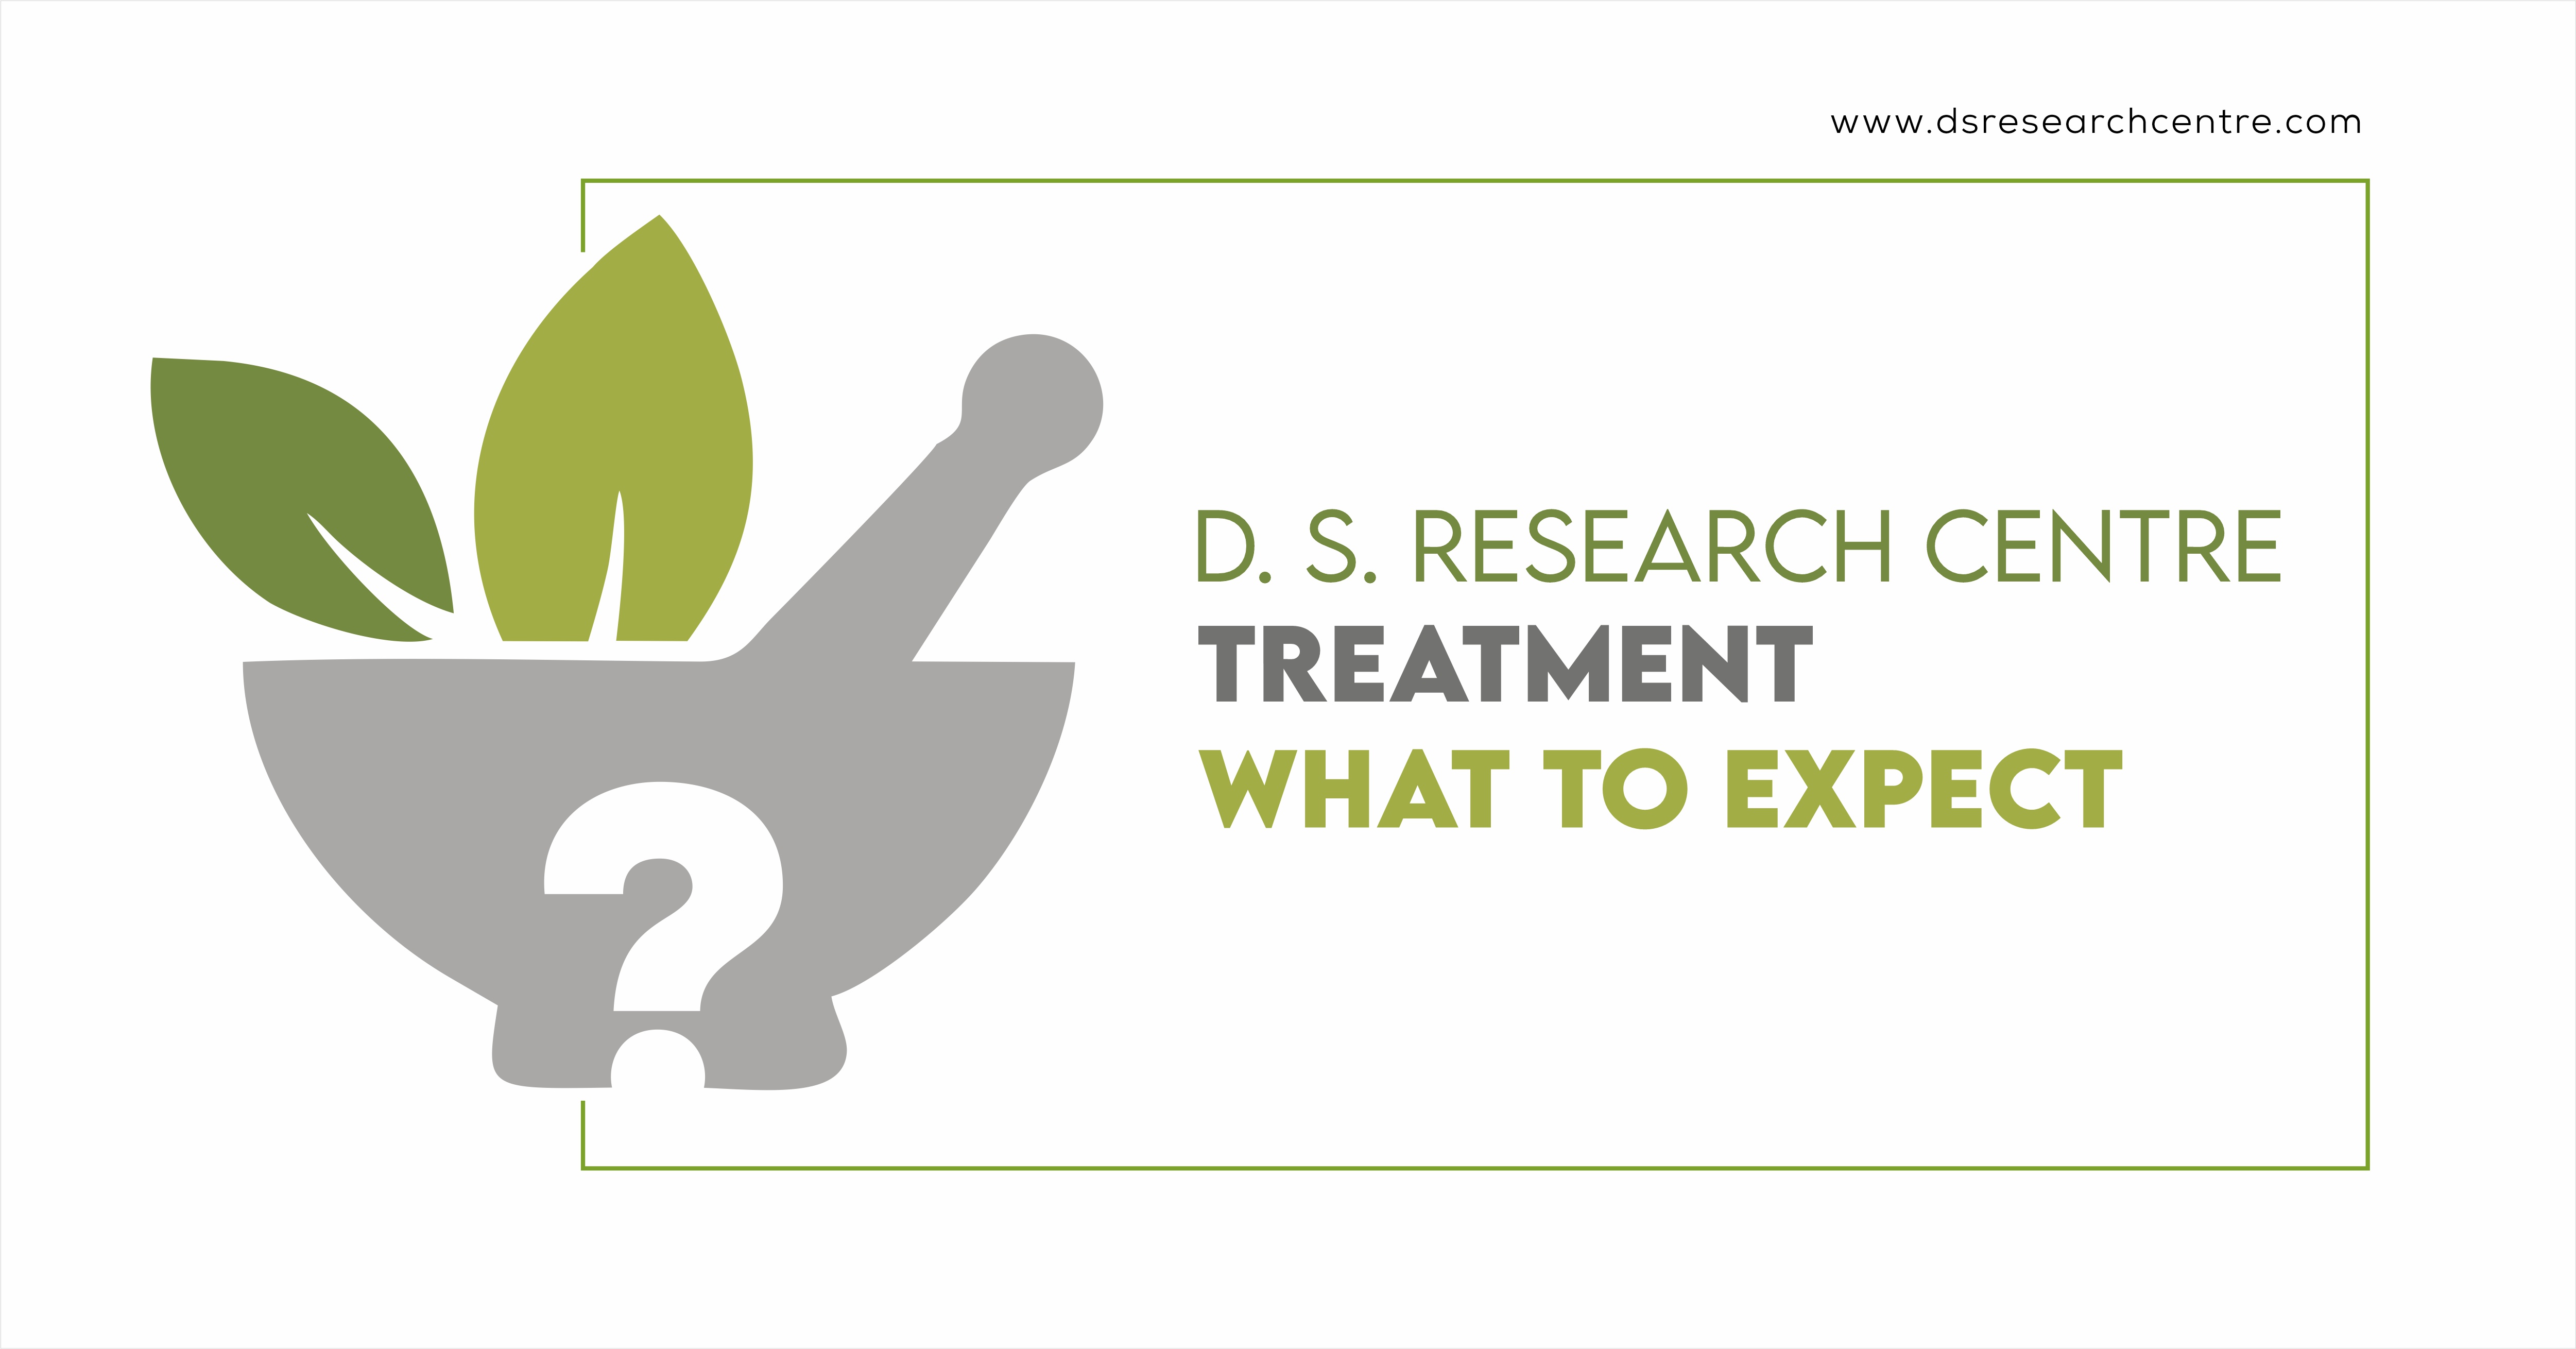 D. S. Research Centre Treatment: - What to Expect